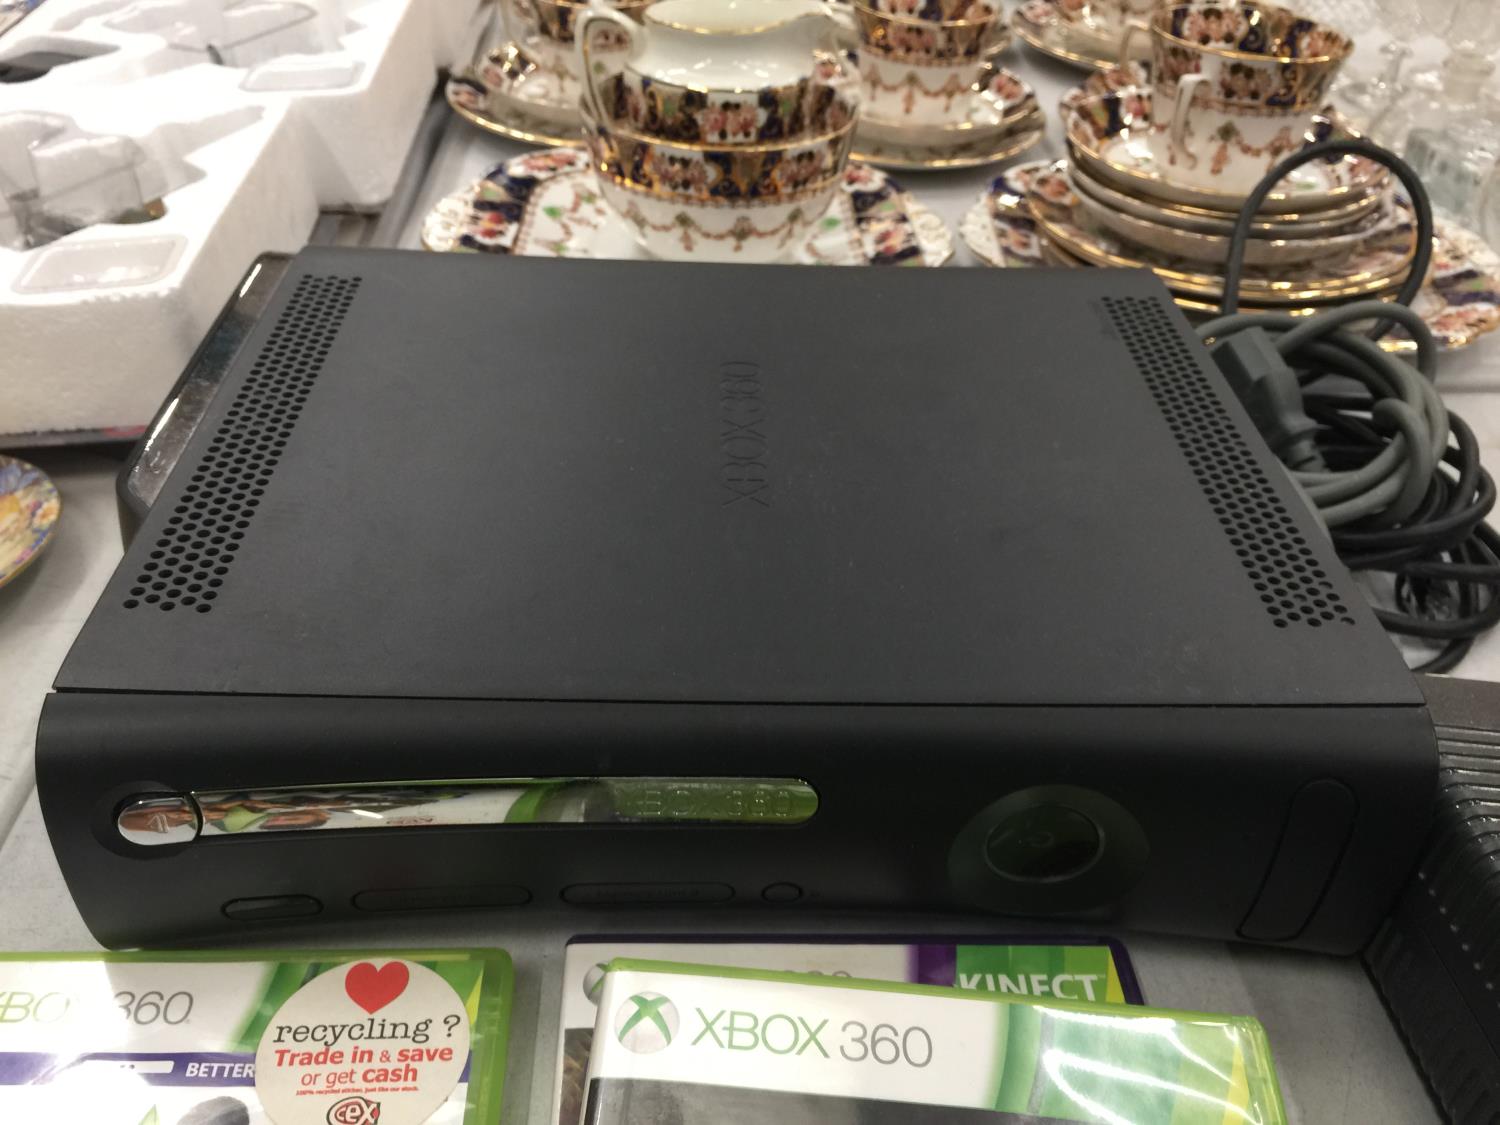 AN X-BOX 360 CONSOLE, POWER PACK, CONTROLLERS AND A QUANTITY OF GAMES TO INCLUDE FIFA '13, '14 - Image 2 of 6